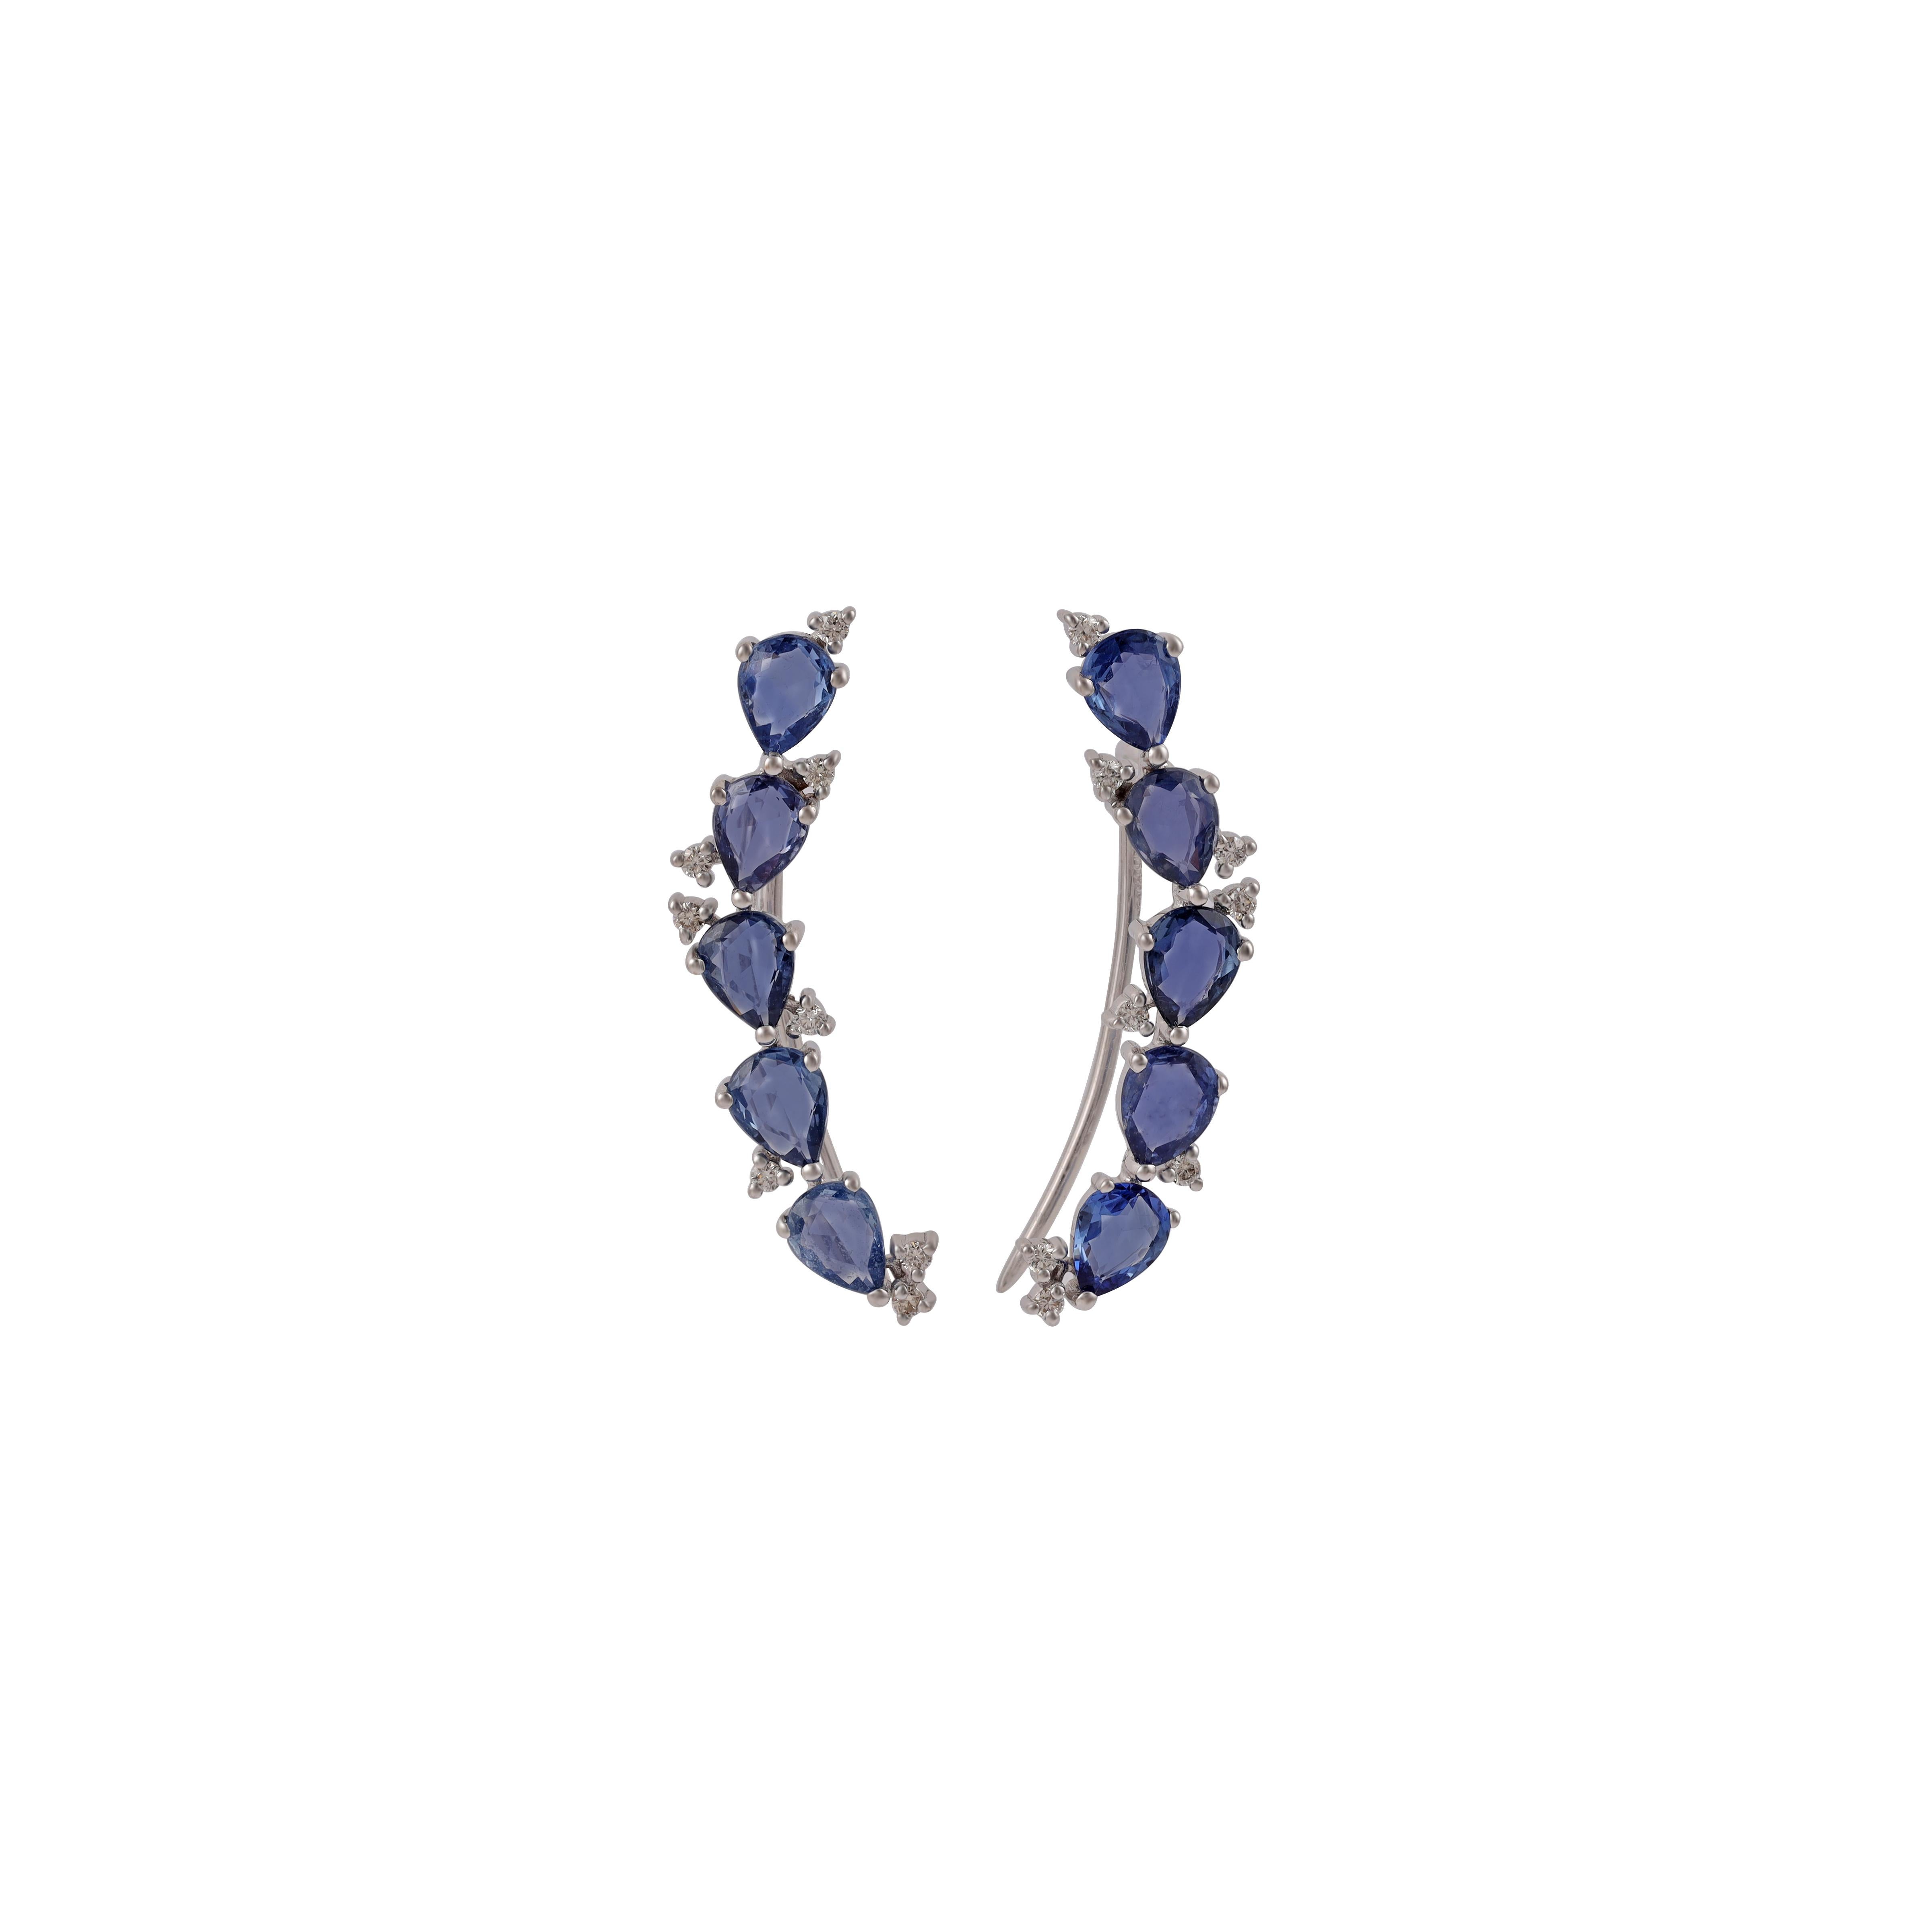 2.31 Carat Real Sapphire Ear  Climber 18k White Gold & Diamonds

A classy and chic 18k white gold ear climber for a truly elegant look. Embellished with 10 natural Sapphire , this beautifully handcrafted earring will upgrade your everyday style and